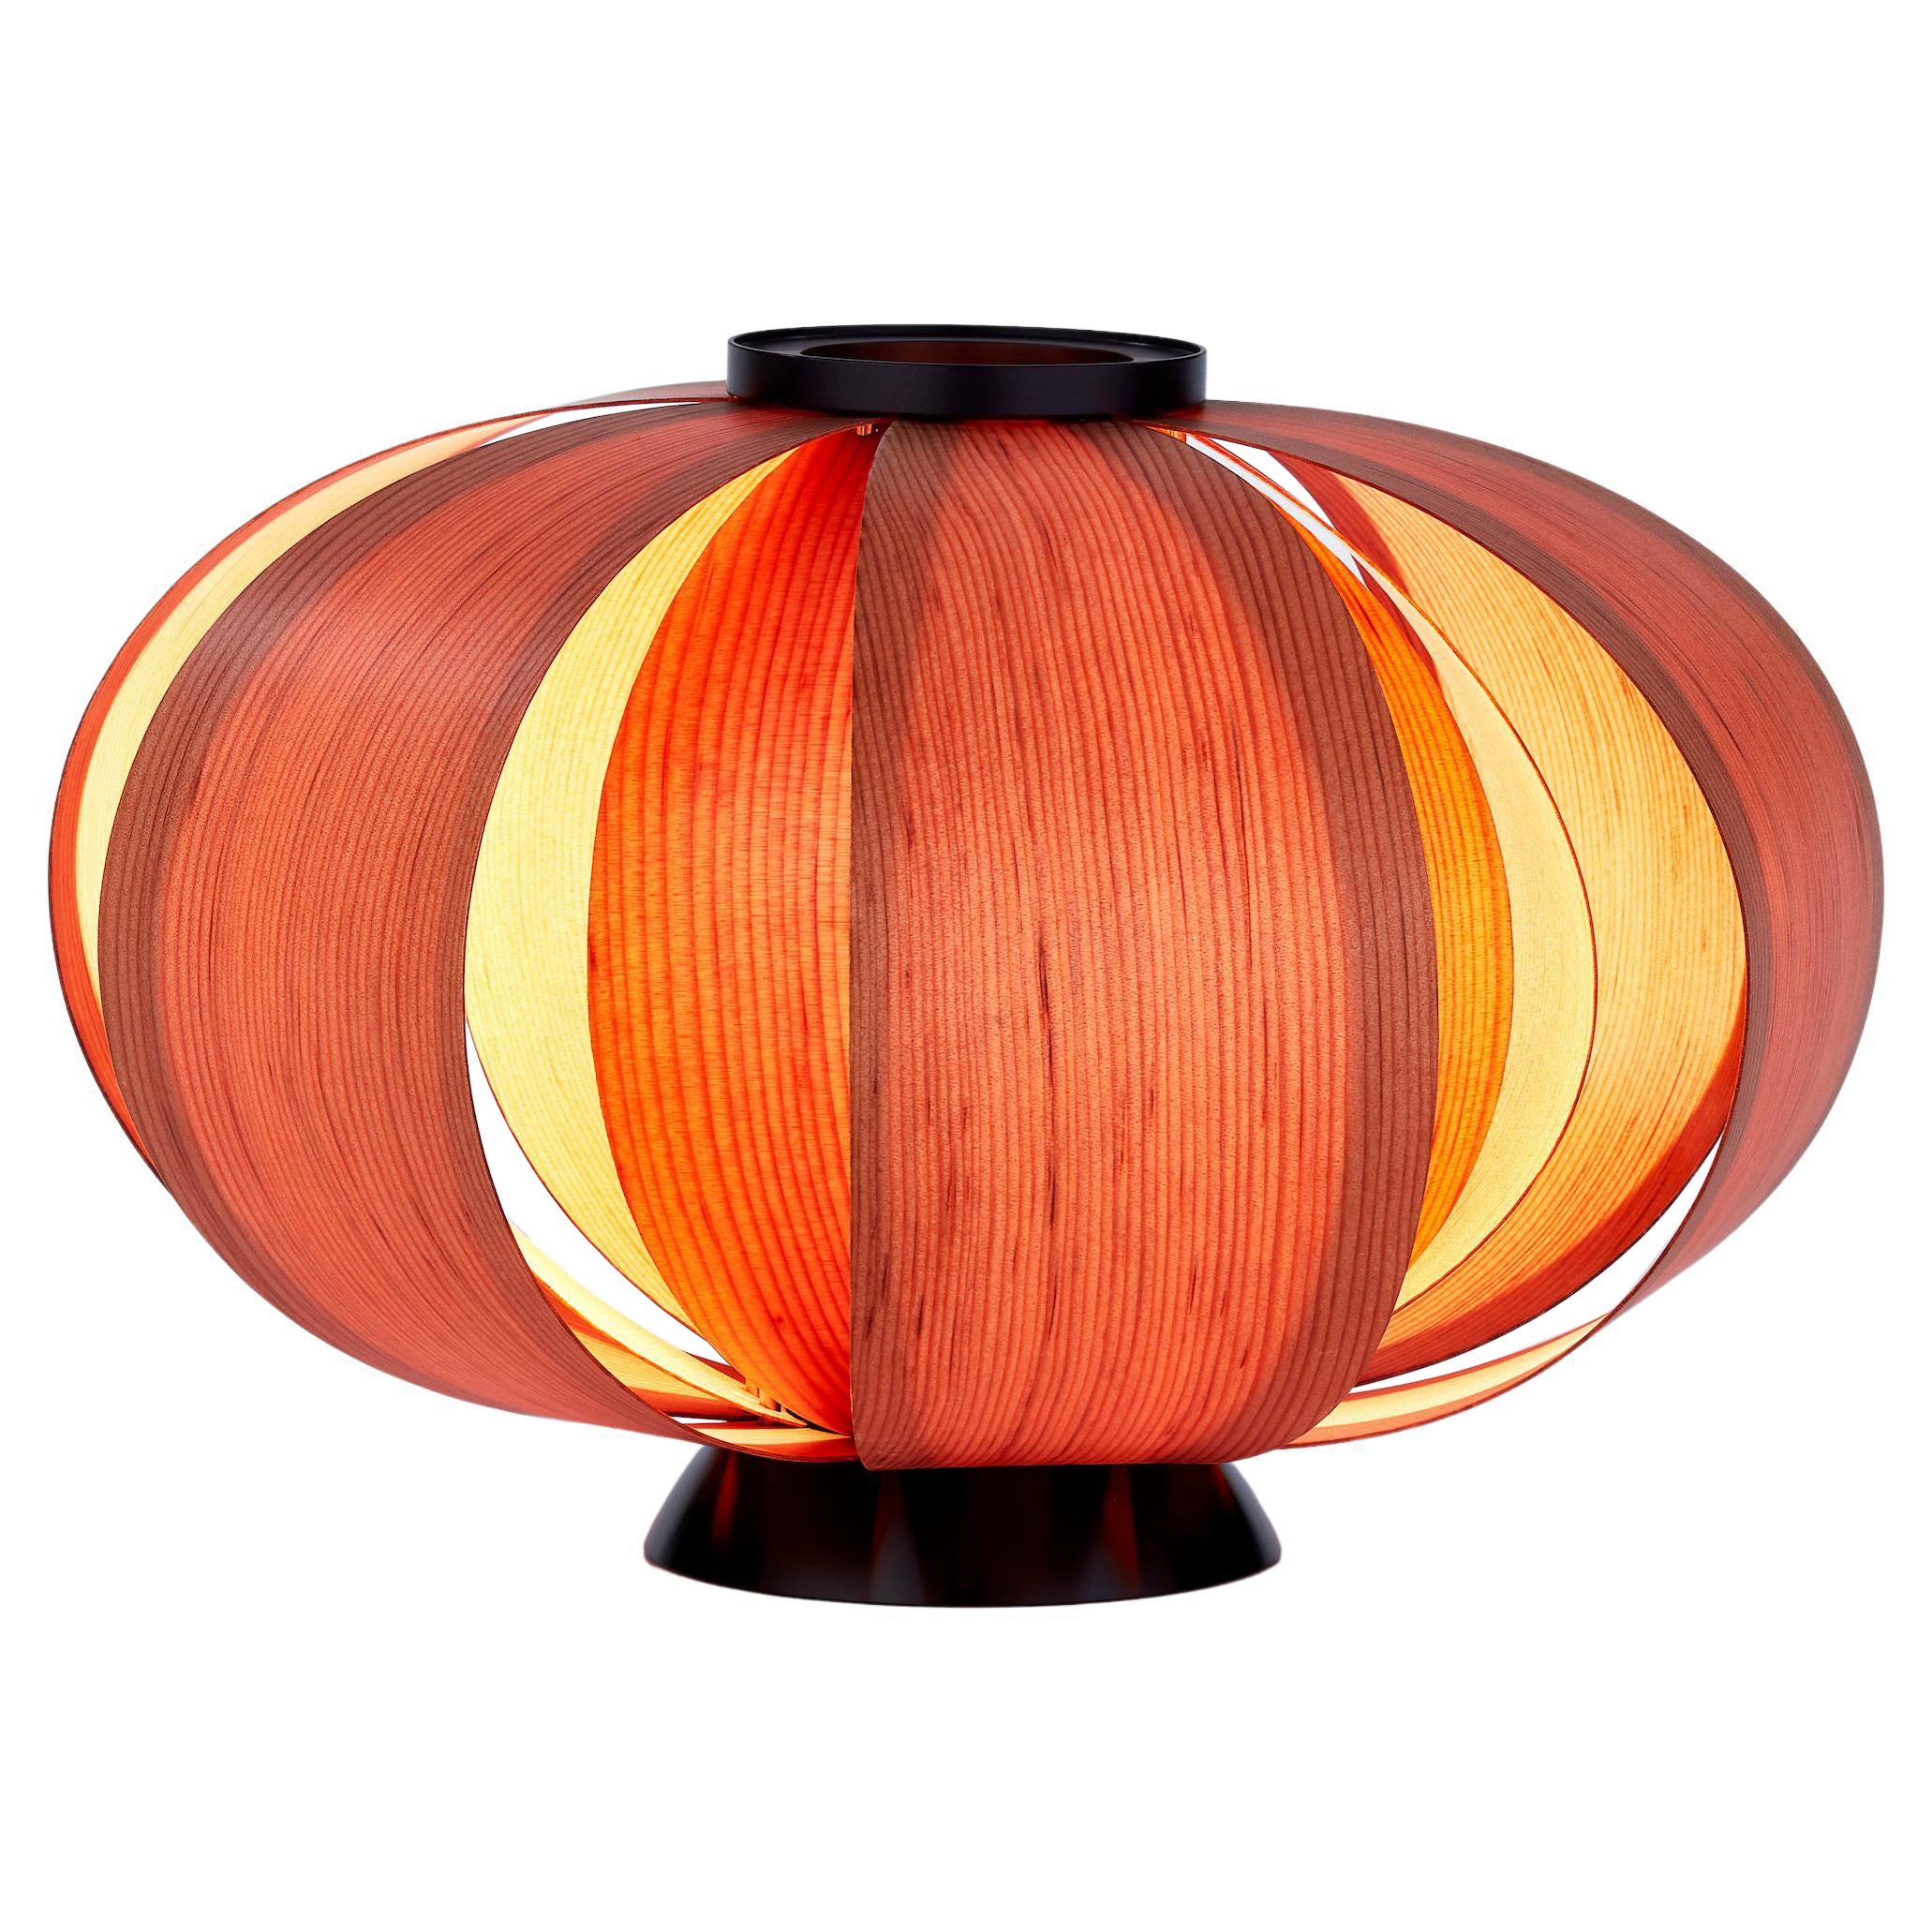 J.A. Coderch 'Disa Mini' Wood Table Lamp for Tunds